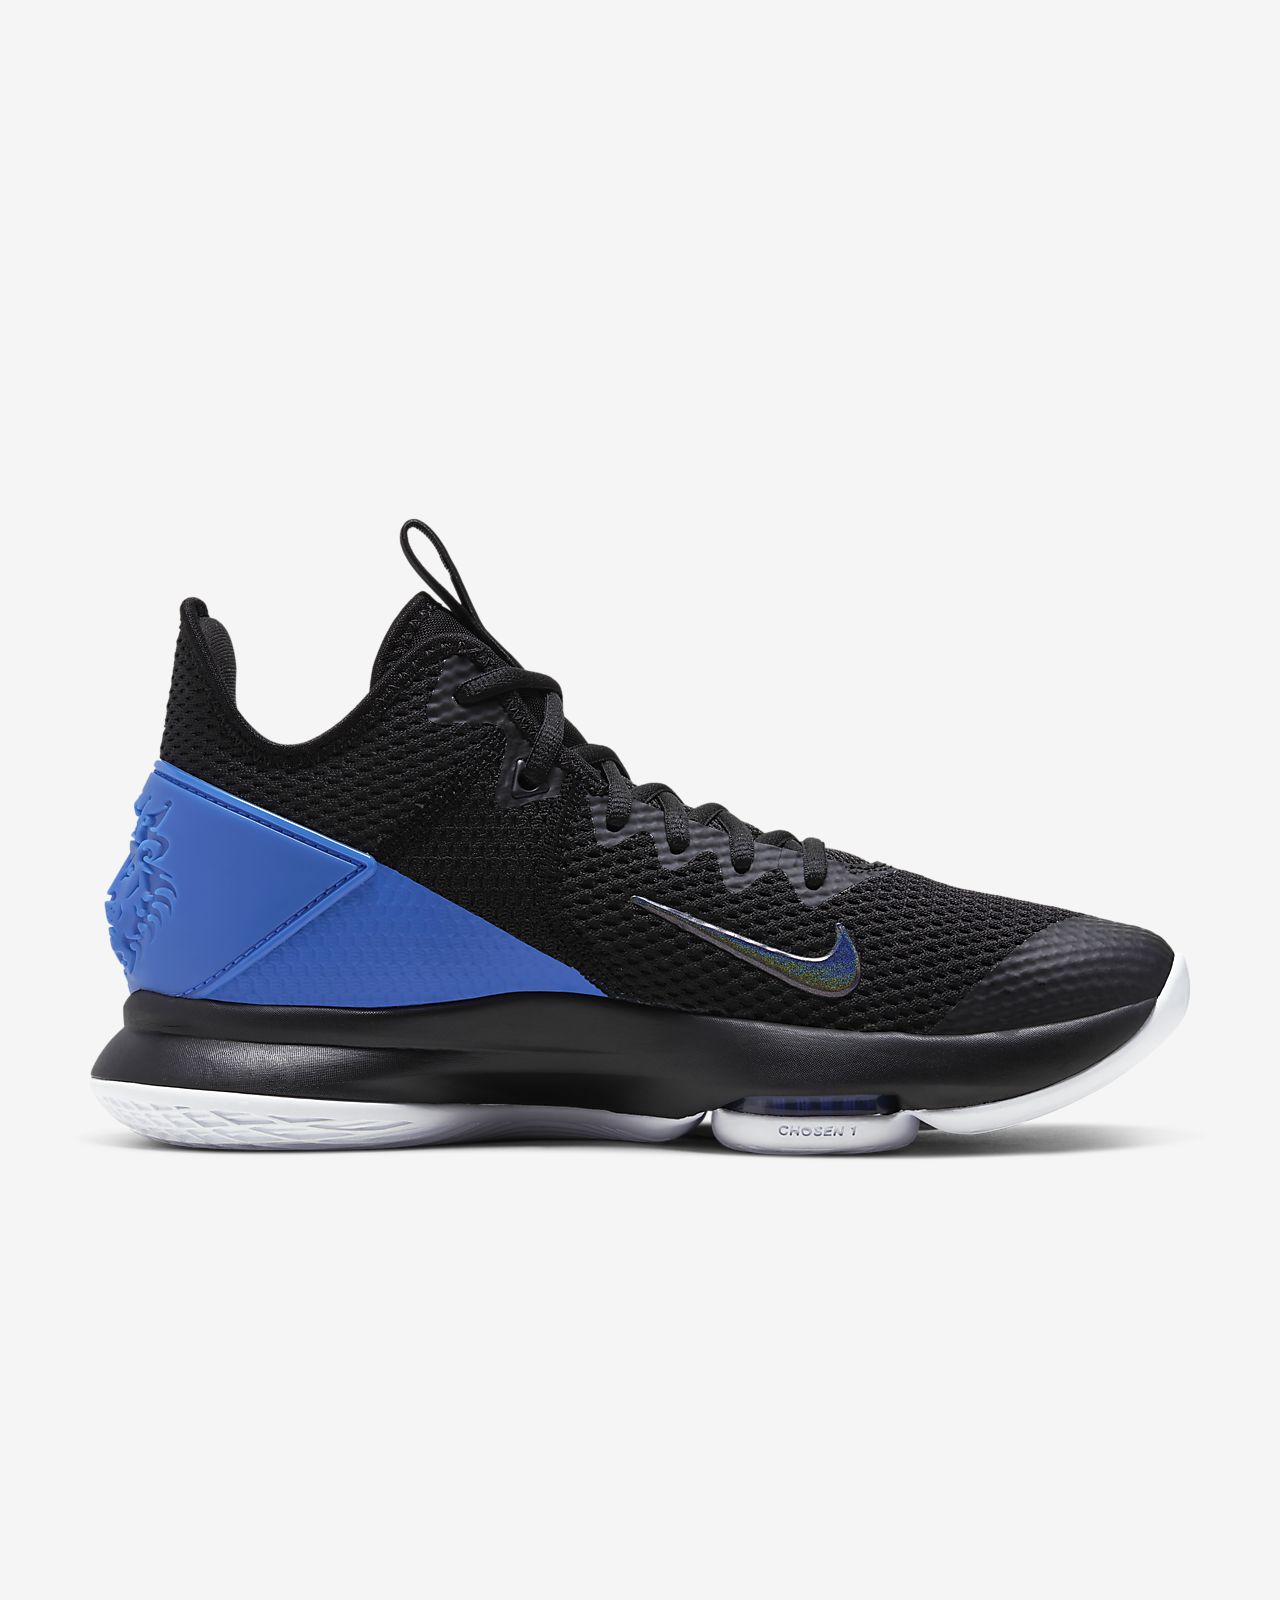 lebron witness 4 black and blue